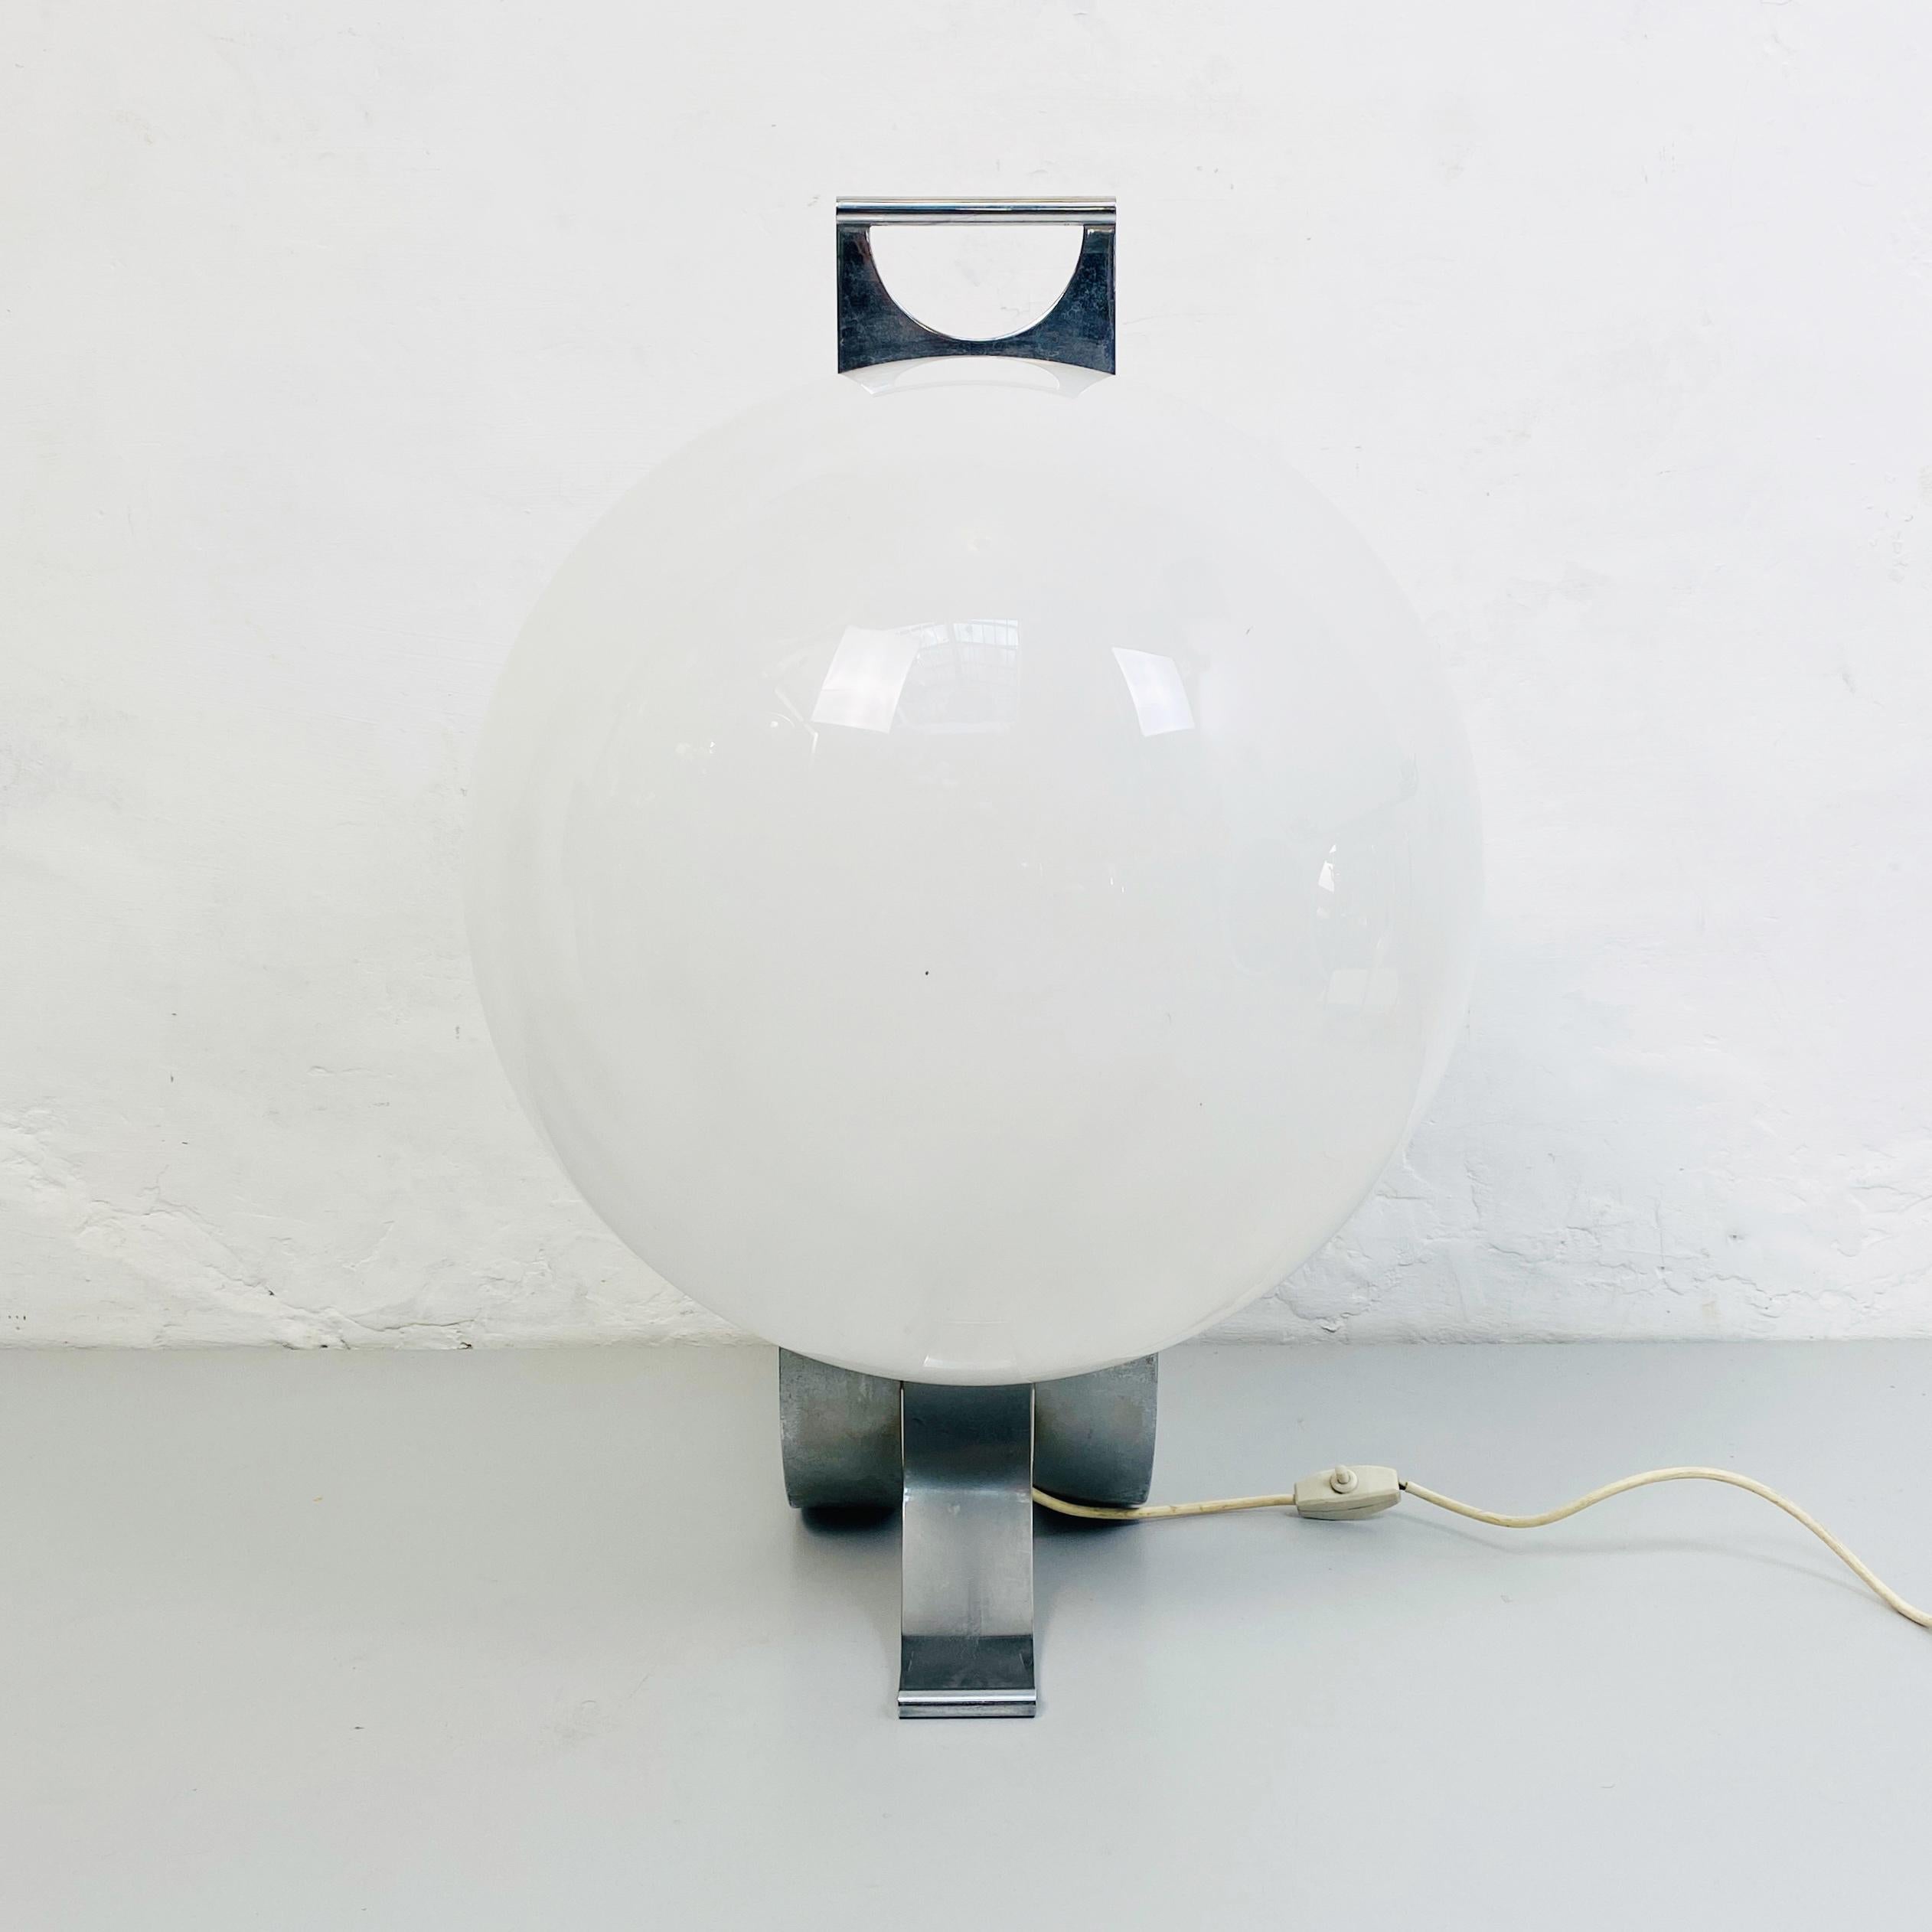 Sfera table lamp by Beni Cuccuru for Ecolight, 1972.
Spherical table lamp composed of two semi-spheres in plexiglass and chromed metal structure. Designed by Beni Cuccuru for Ecolight in 1972.

Good condition, some marks on the